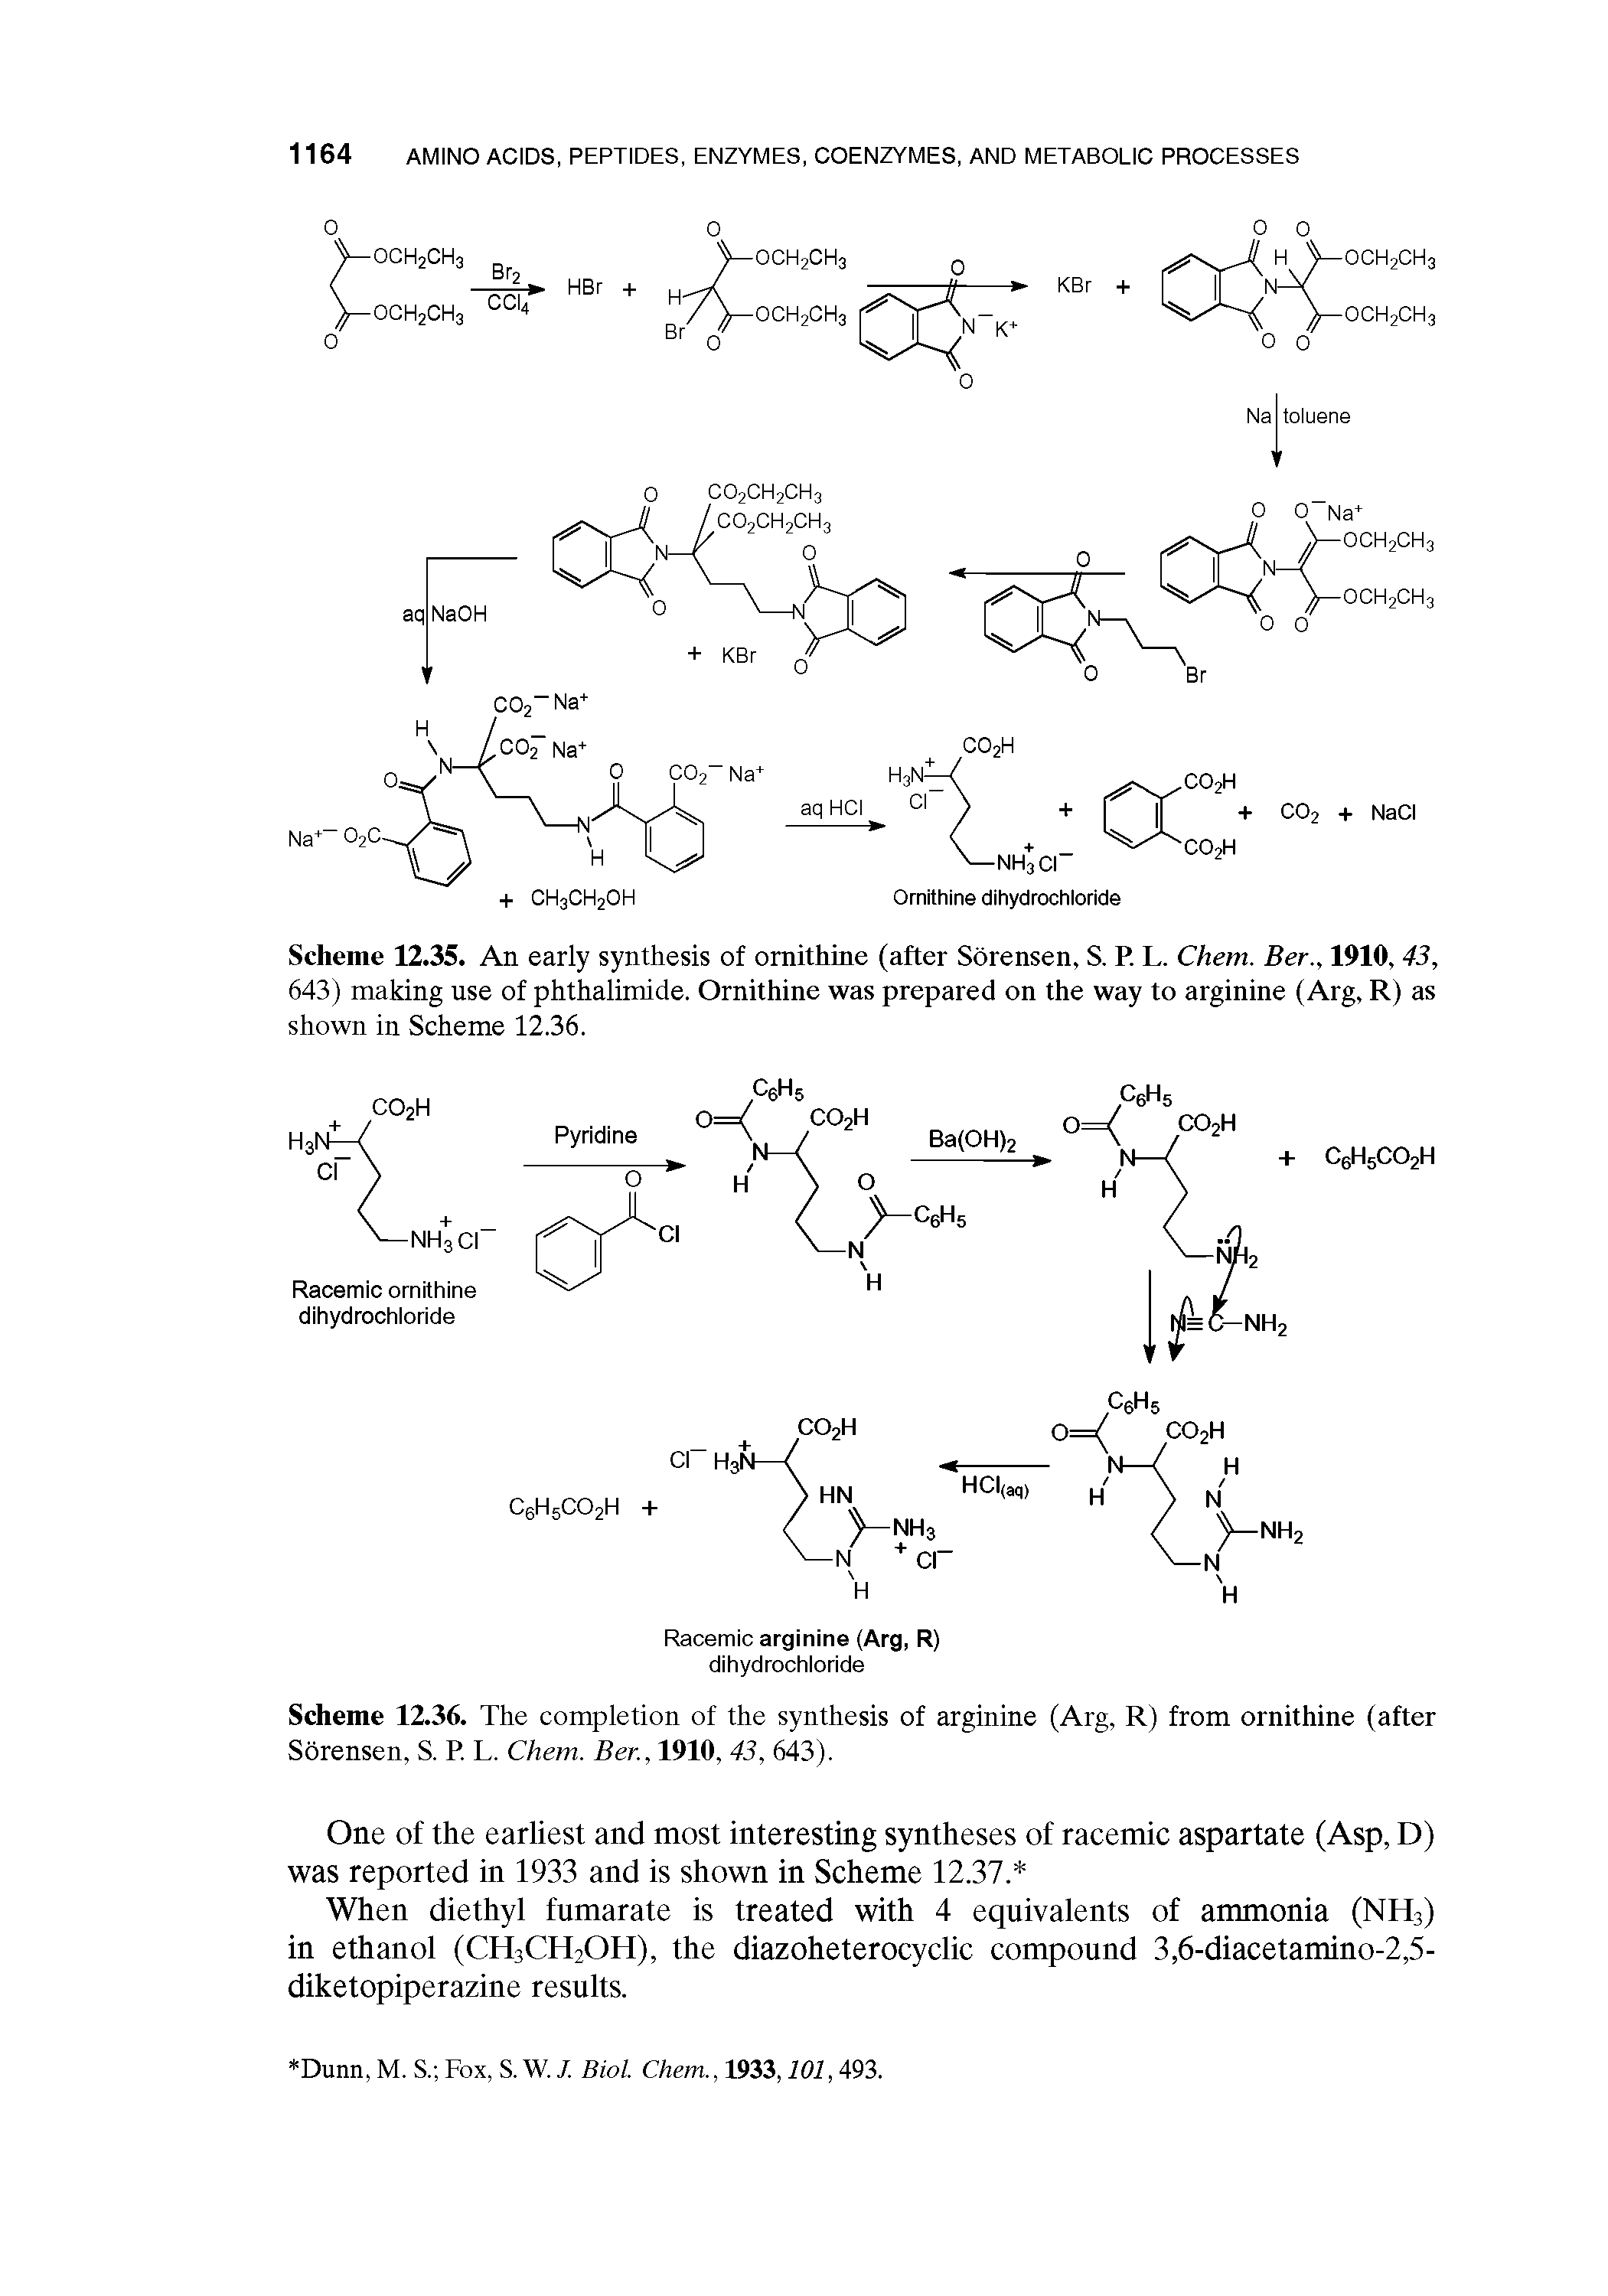 Scheme 12.35. An early synthesis of ornithine (after Sorensen, S. P. L. Chem. Ber.y 1910,43, 643) making use of phthalimide. Ornithine was prepared on the way to arginine (Arg, R) as shown in Scheme 12.36.